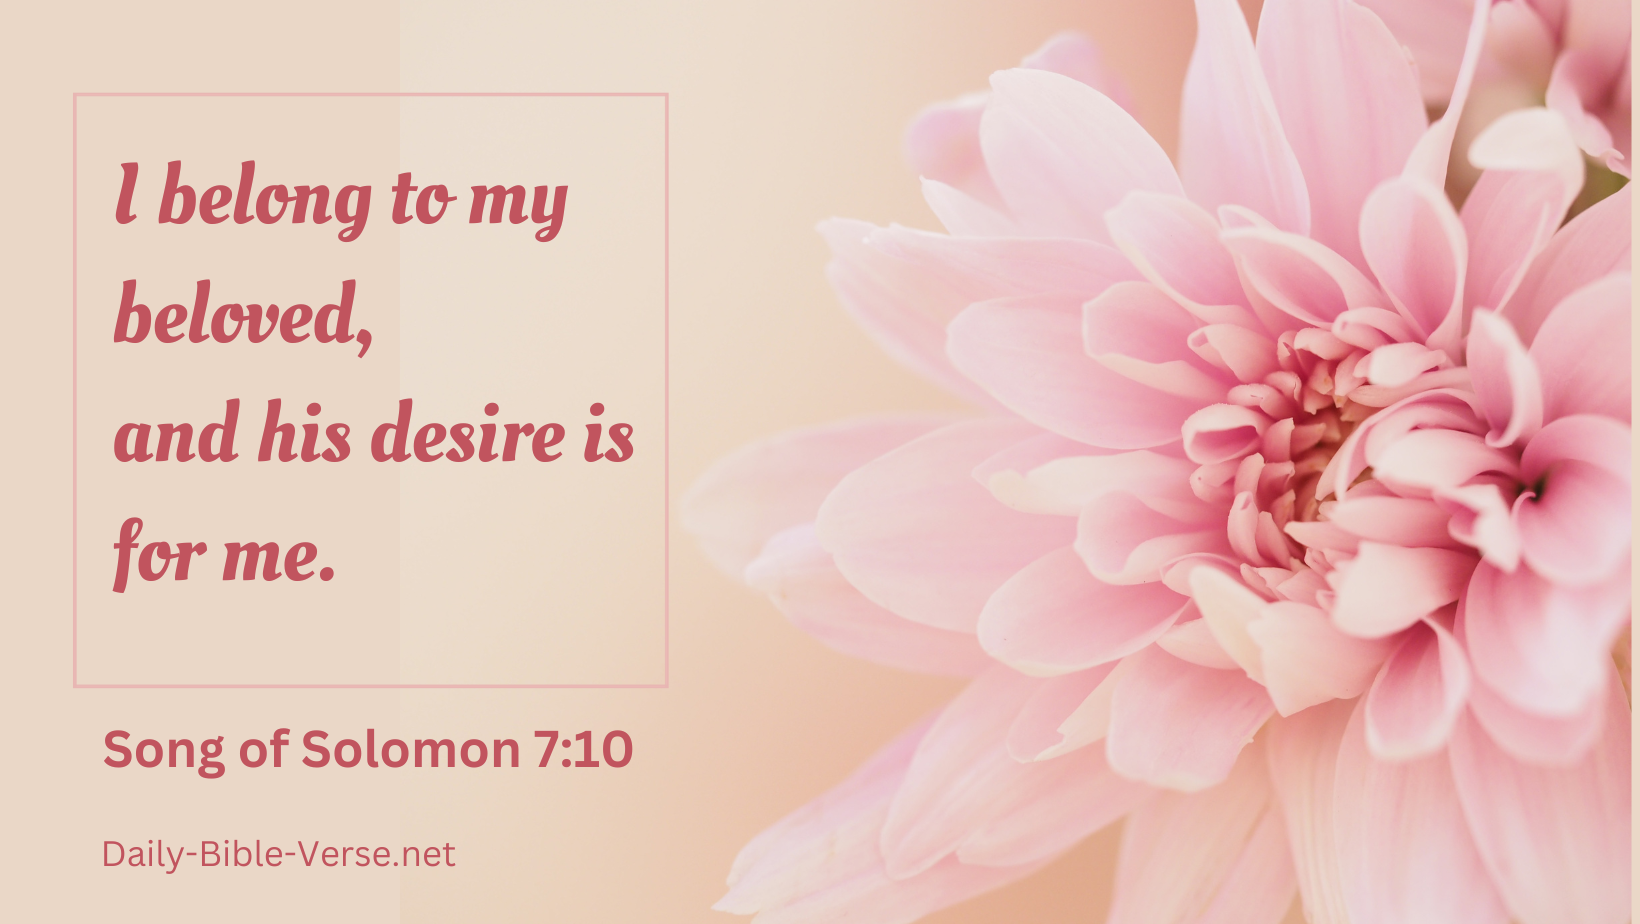 I belong to my beloved, and his desire is for me.